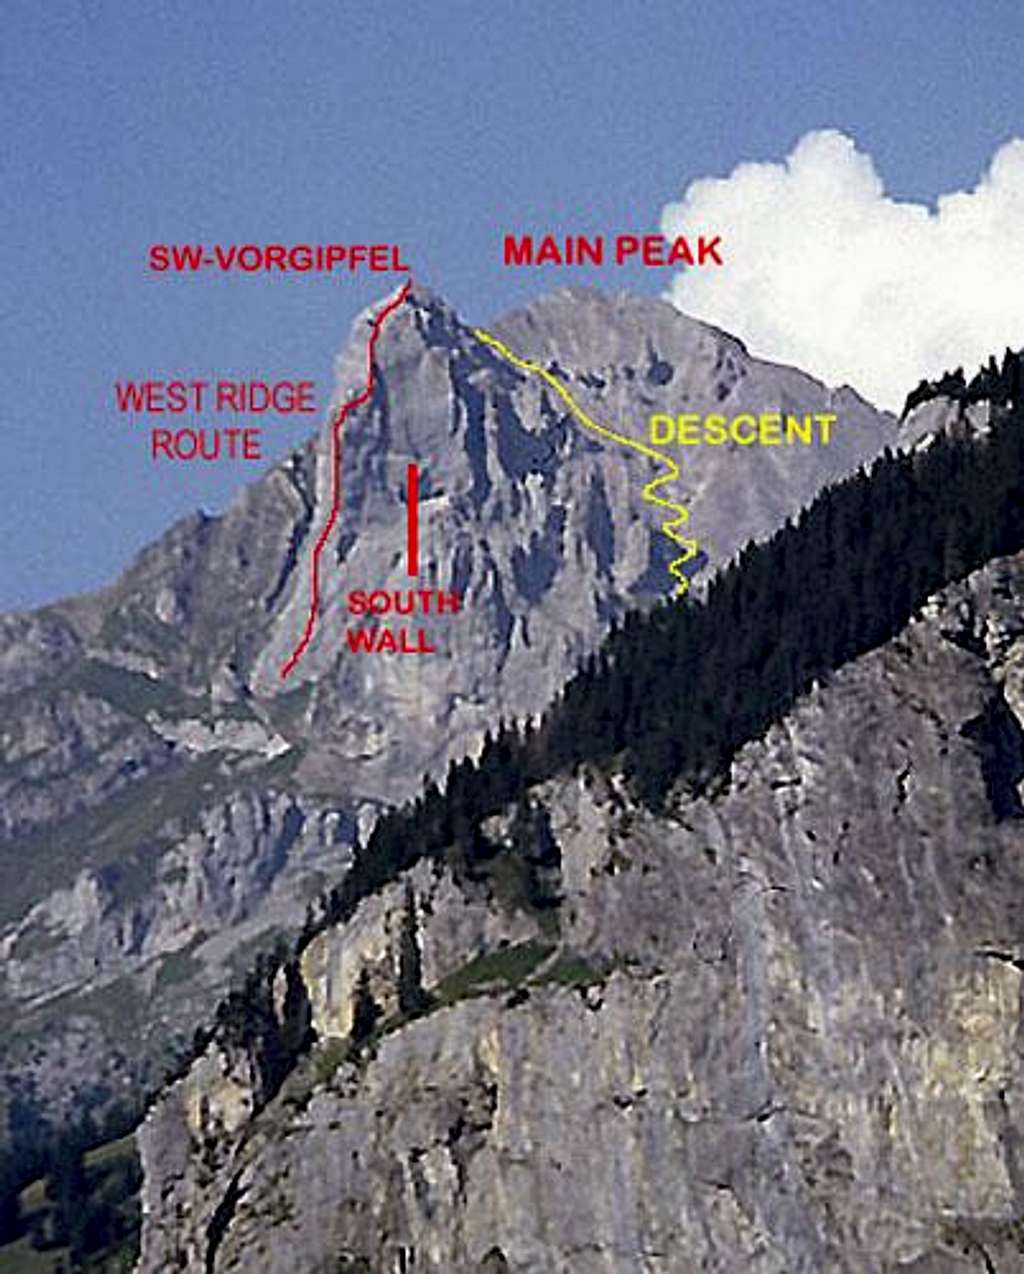 Ärmighorn routes from the north